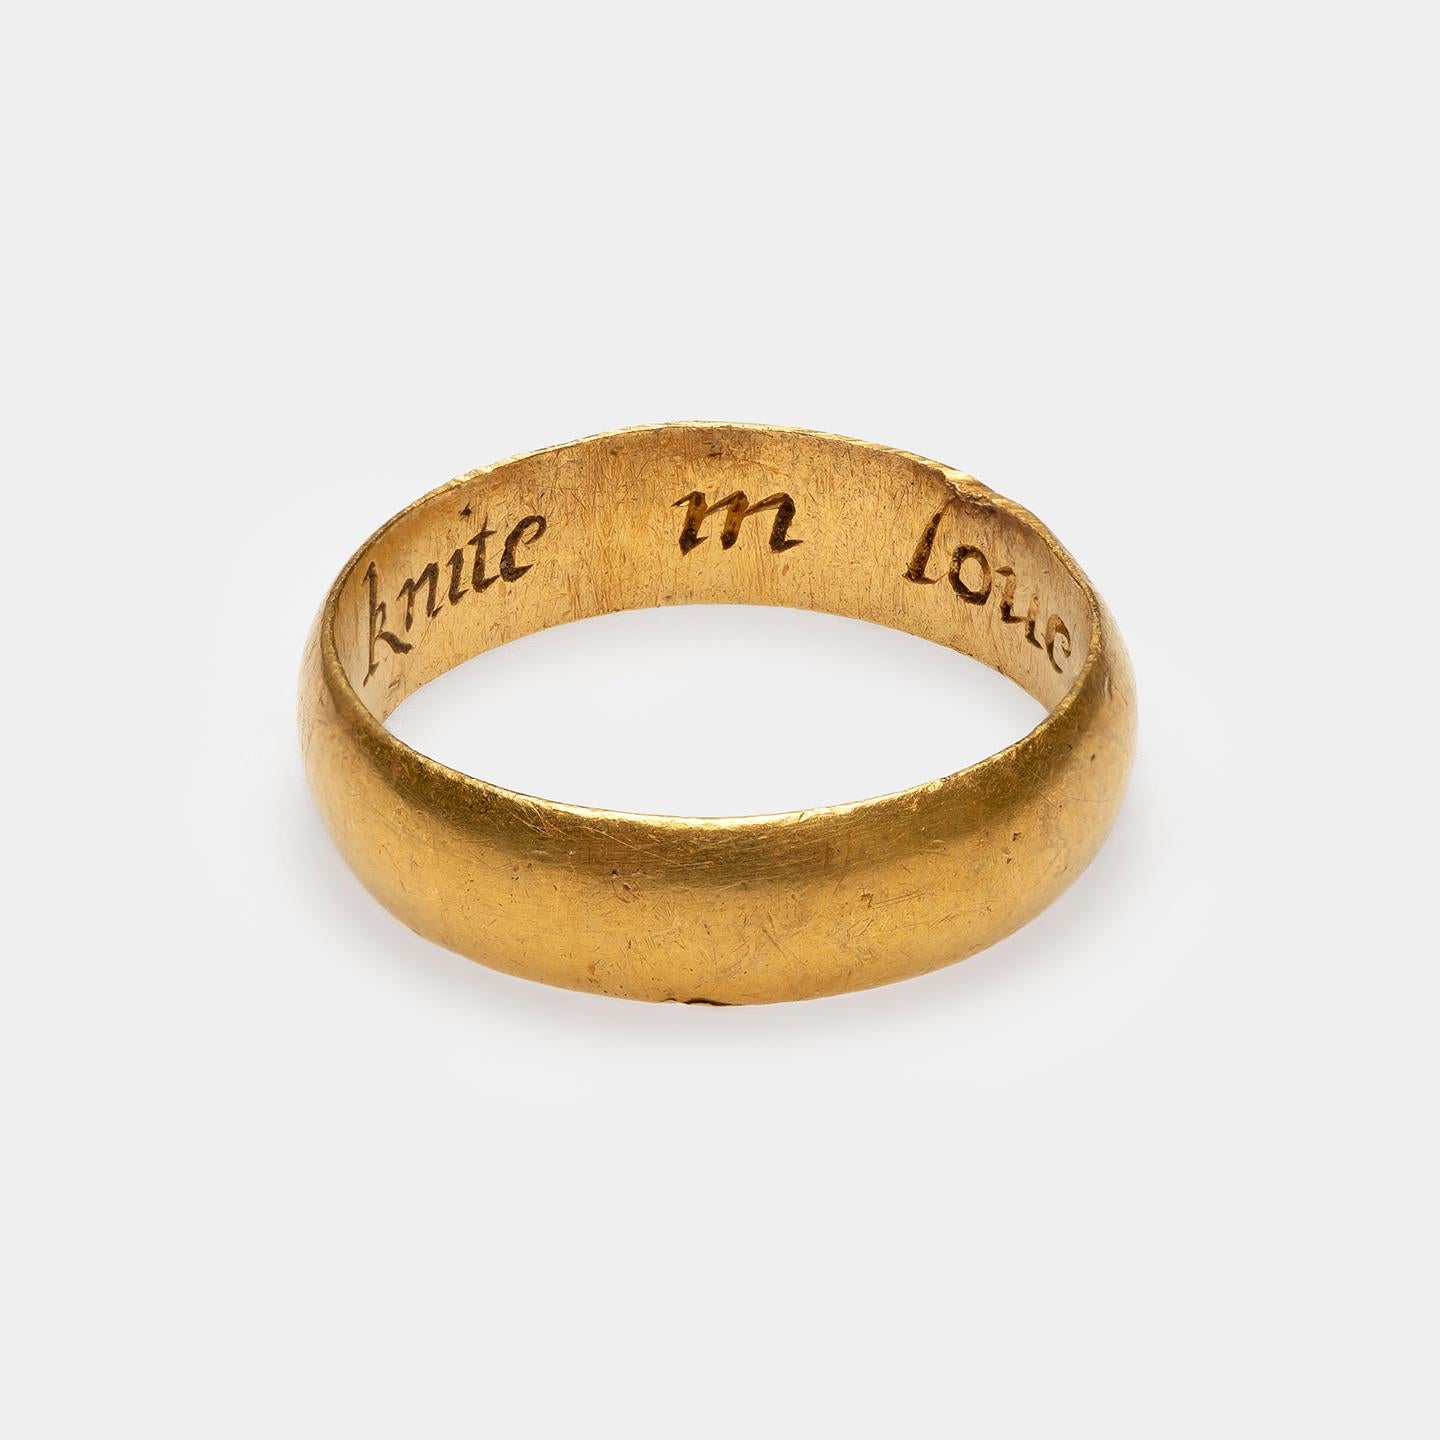 Posy Ring “A knote knit in love”
England, late 17th century
Gold
Weight 5 gr; Circumference 57.65 mm; US size 8 1/4; UK size Q 1/2

A wide gold band with D-section and inside the engraved italic inscription “A knote knit in love.” The ring shows